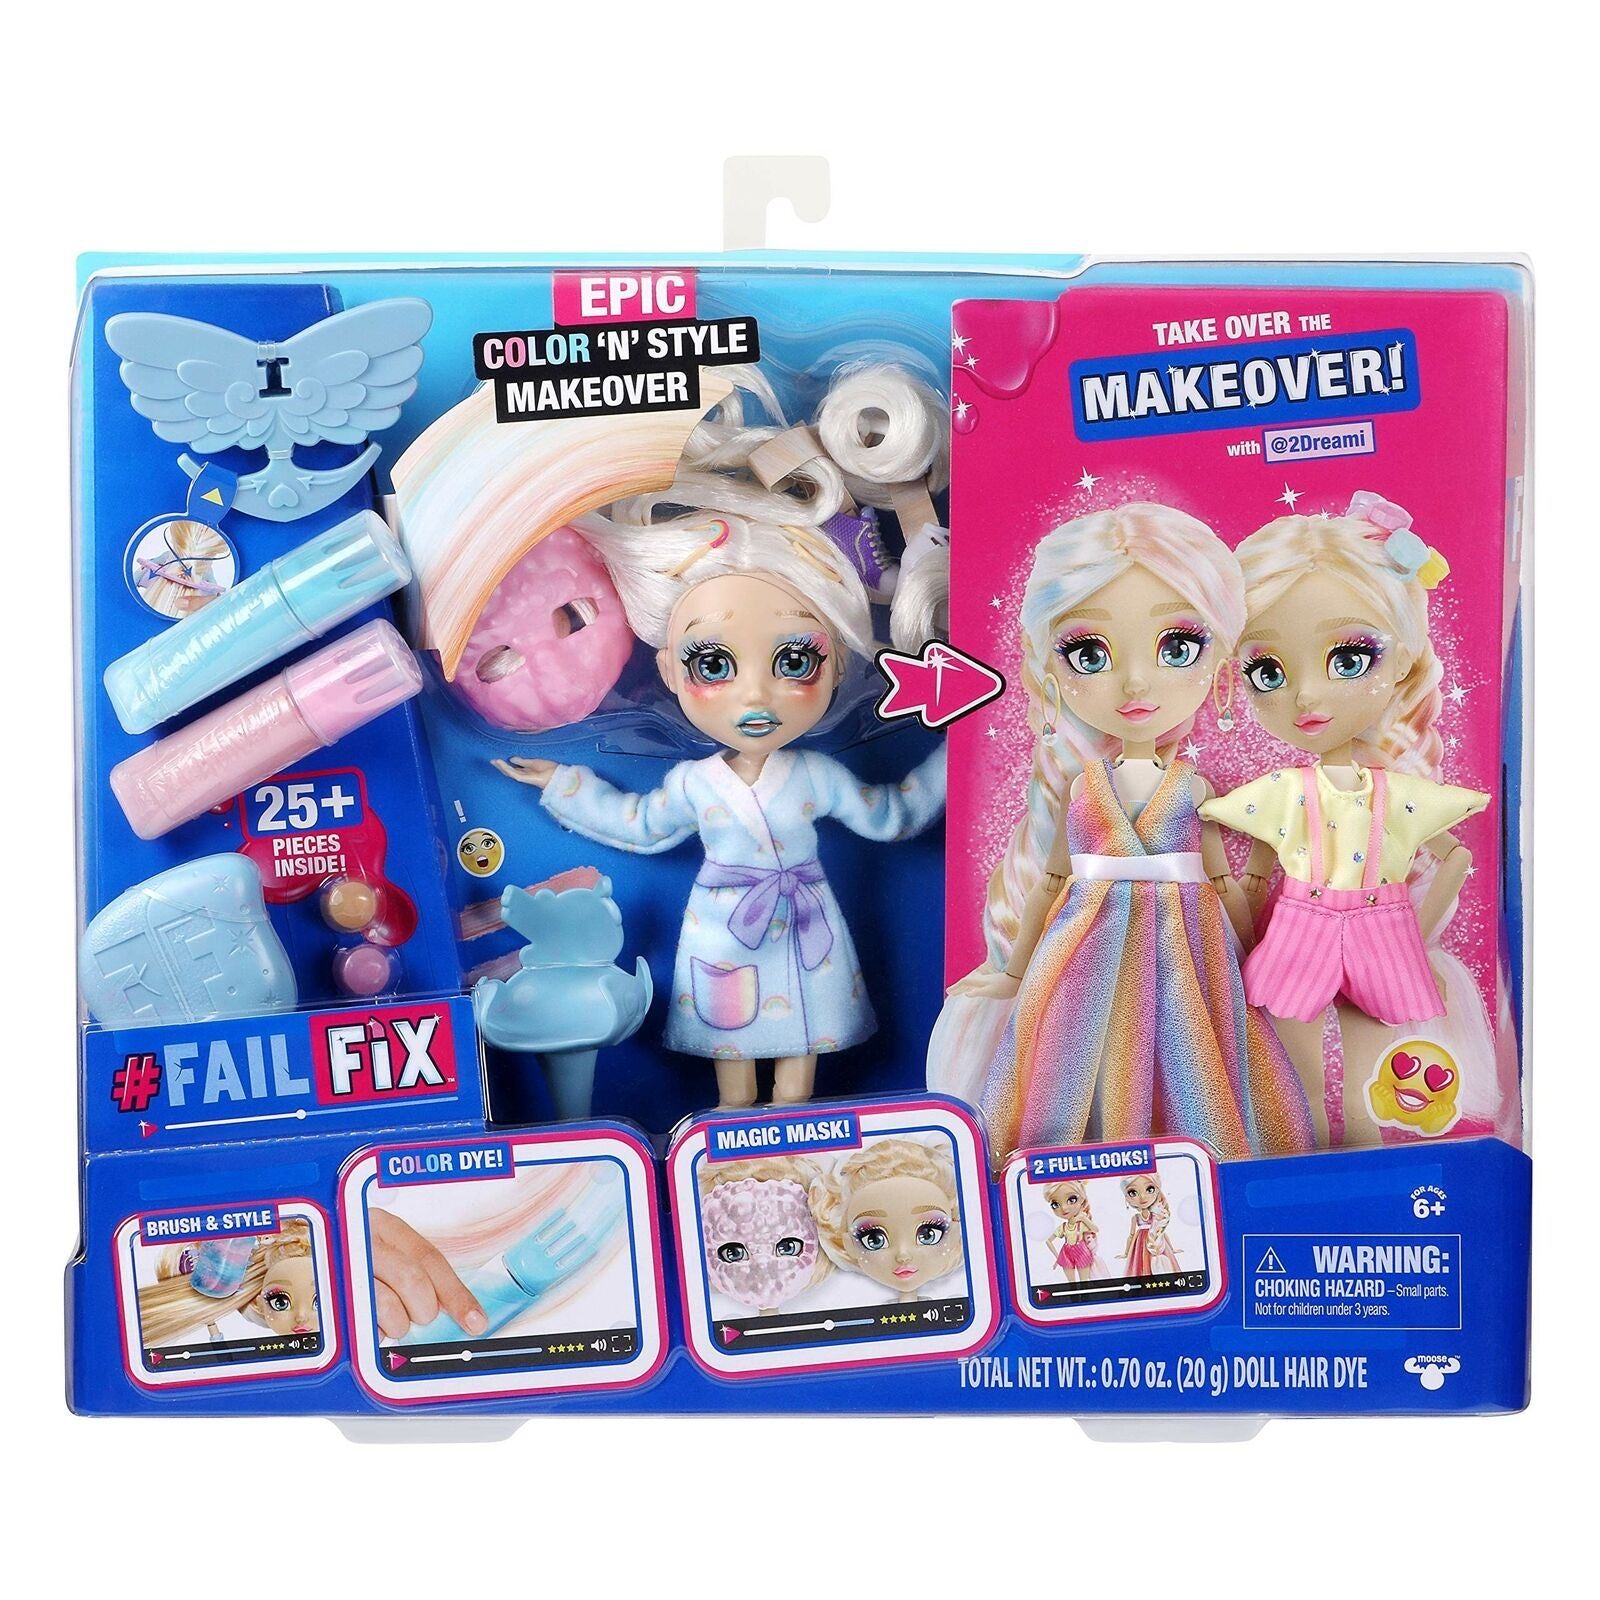 FAILFIX 2Dreami Epic Color 'N' Style Makeover Doll Pack 8.5" Fashion Doll